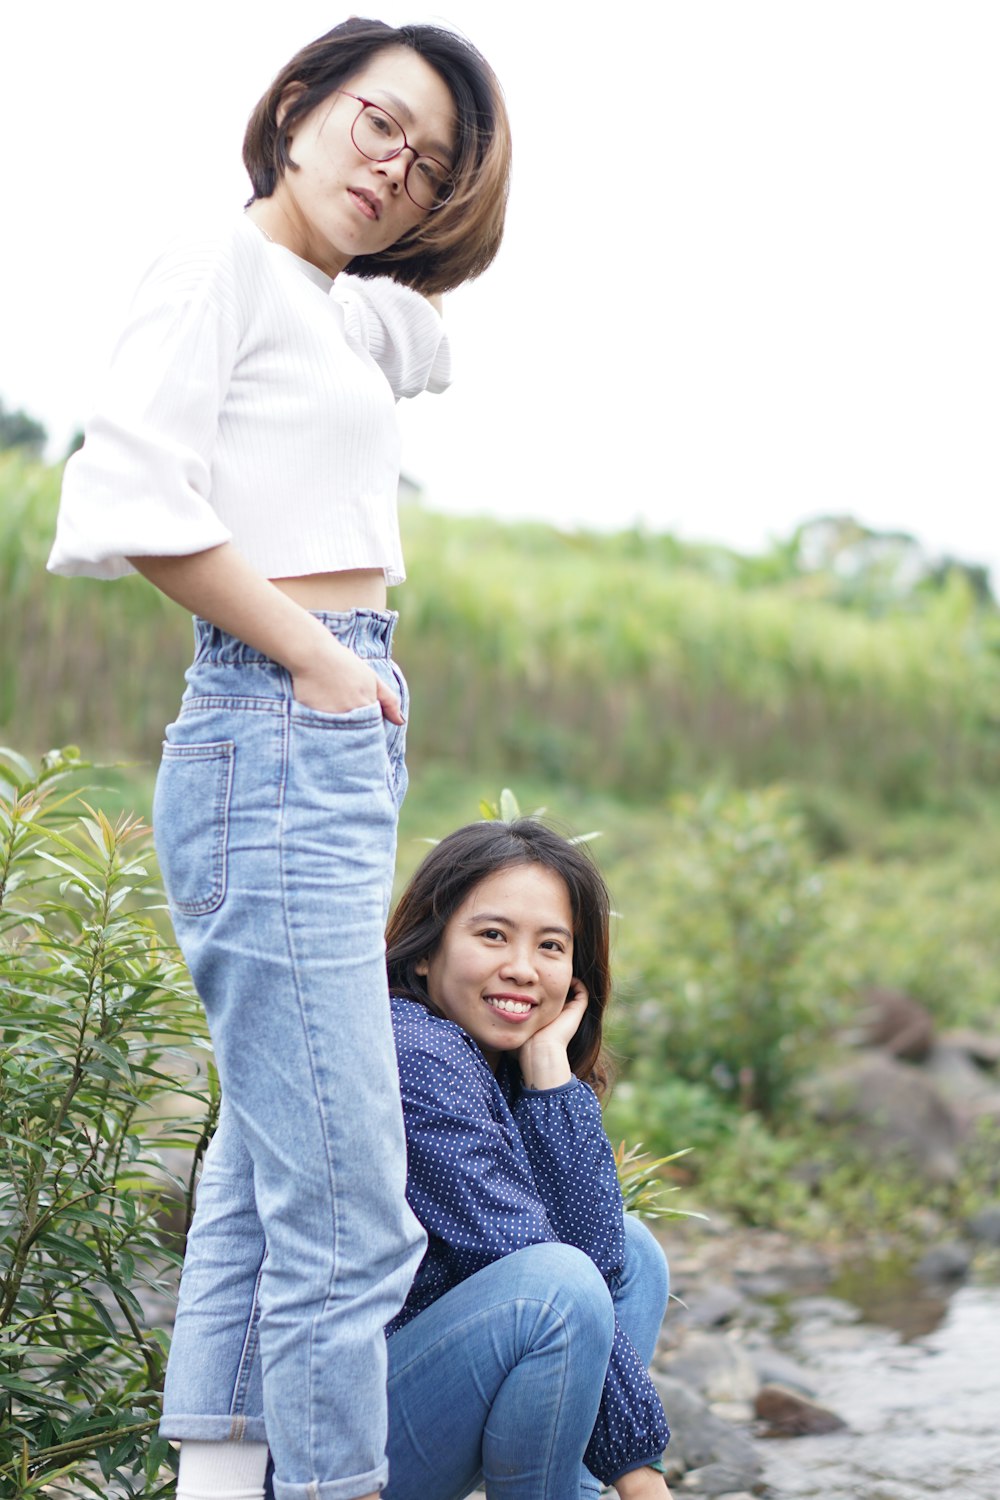 girl in white t-shirt and blue denim jeans standing on green grass field during daytime